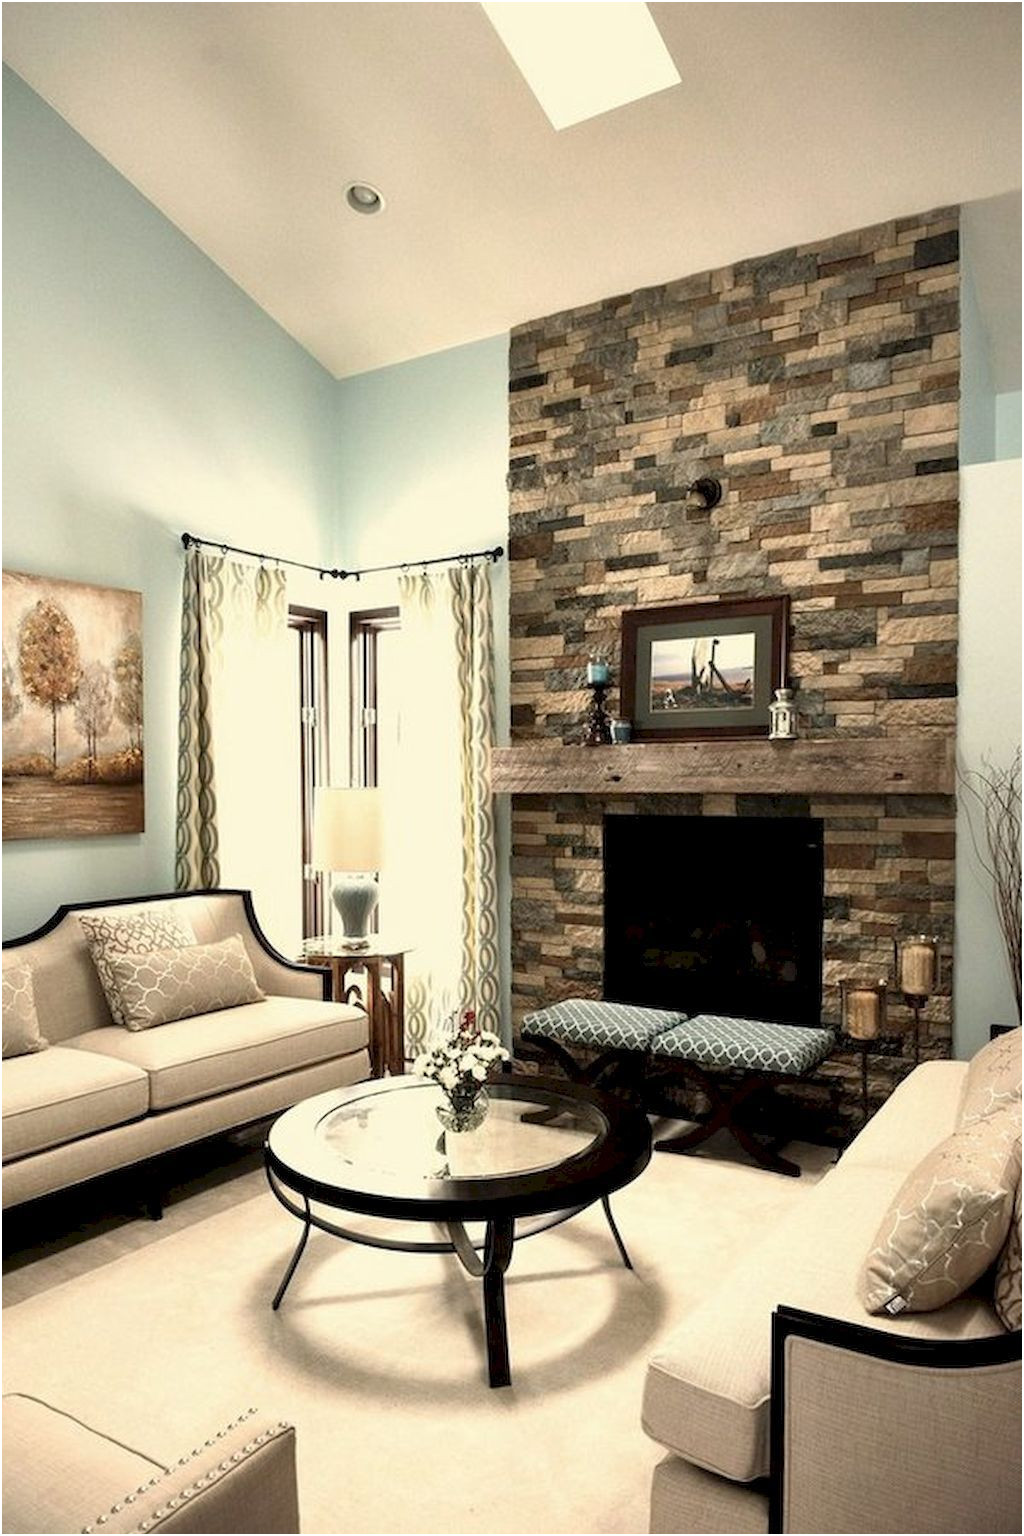 Awesome Fireplace Decorating Ideas Photos